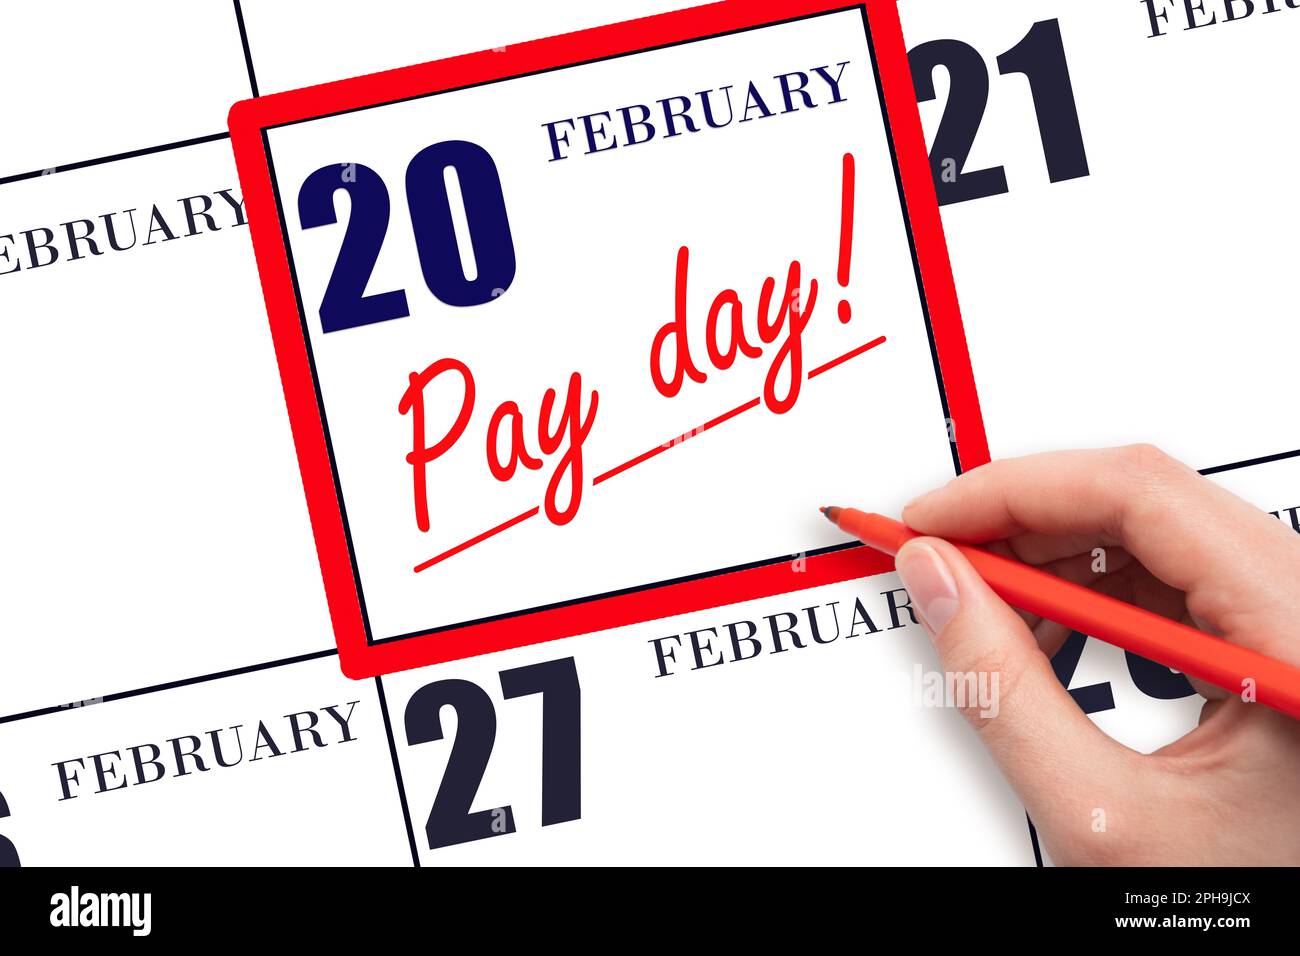 20th day of February. Hand writing text PAY DATE on calendar date February 20 and underline it. Payment due date.  Reminder concept of payment. Winter Stock Photo